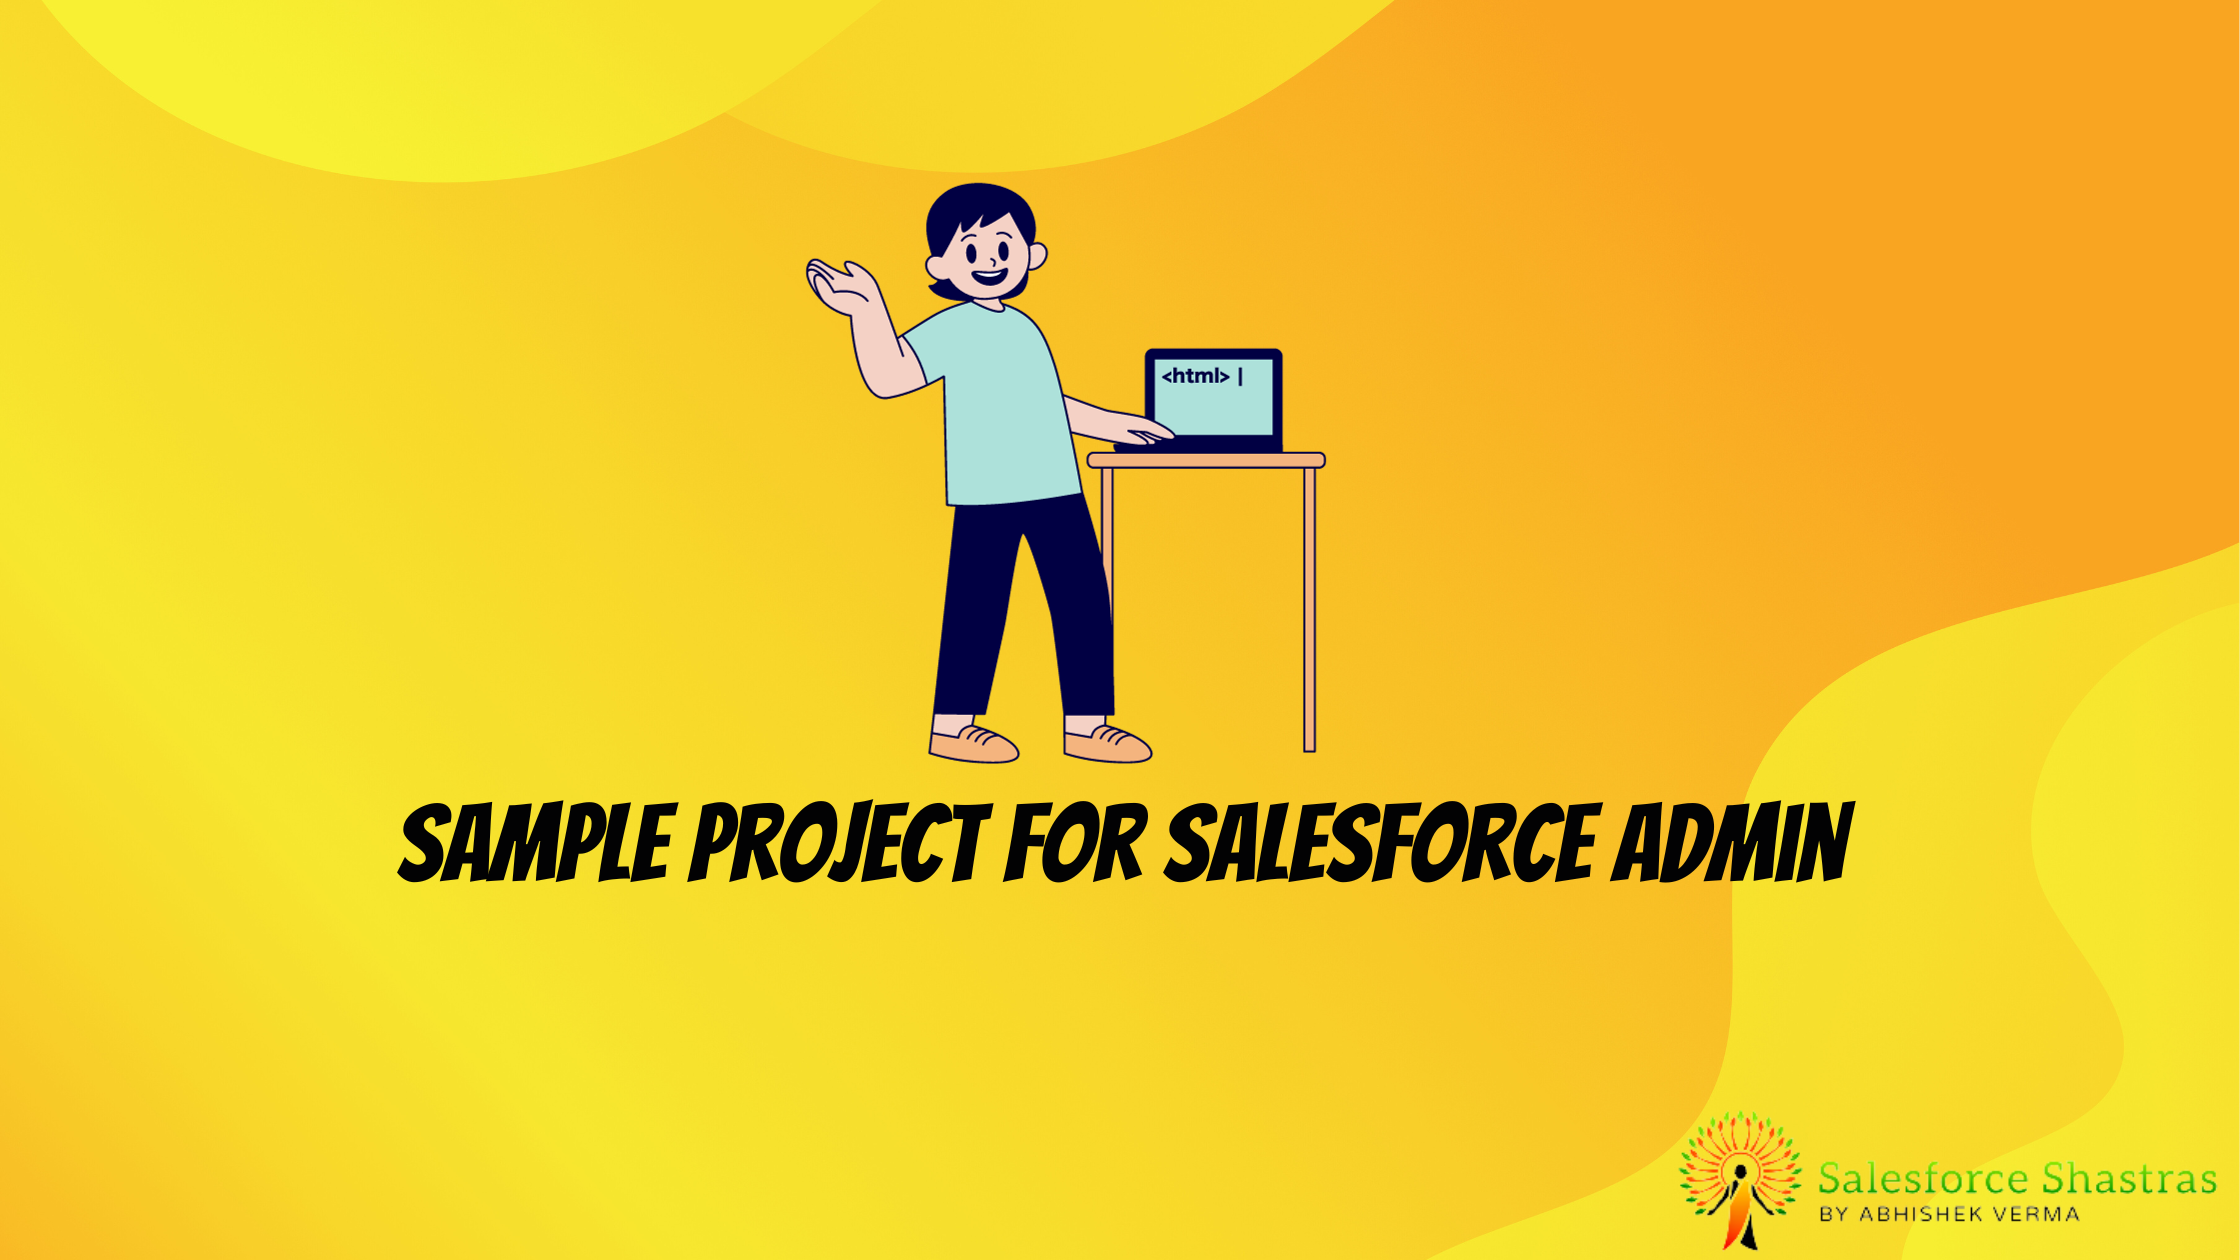 Sample Project for Salesforce Admin